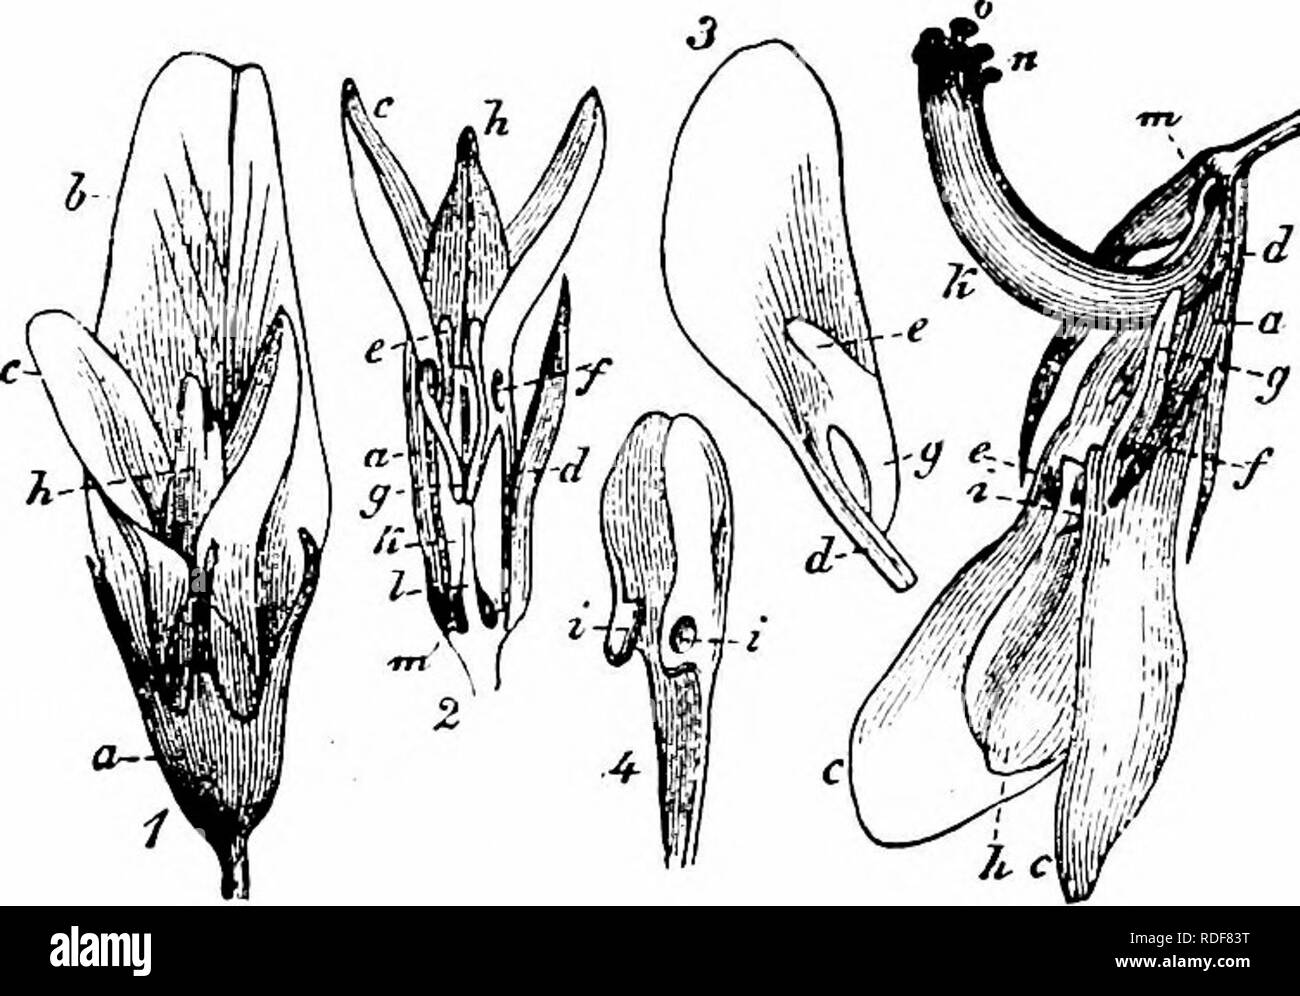 . Handbook of flower pollination : based upon Hermann Mu?ller's work 'The fertilisation of flowers by insects' . Fertilization of plants. 276 ANGIOSPERMAE—DICOTYLEDONES comes into contact with the insect, getting cross-pollinated if this has previously visited another flower of the species. The first flower visited by an insect will be self-pollinated as the visitor backs out of it. Should insect-visits fail, automatic self-pollination of unexploded flowers is possible, and may be effective under certain conditions (vide infra). BurkiU (Proc. Phil. Soc, Cambridge, viii, 1894) aptly describes t Stock Photo